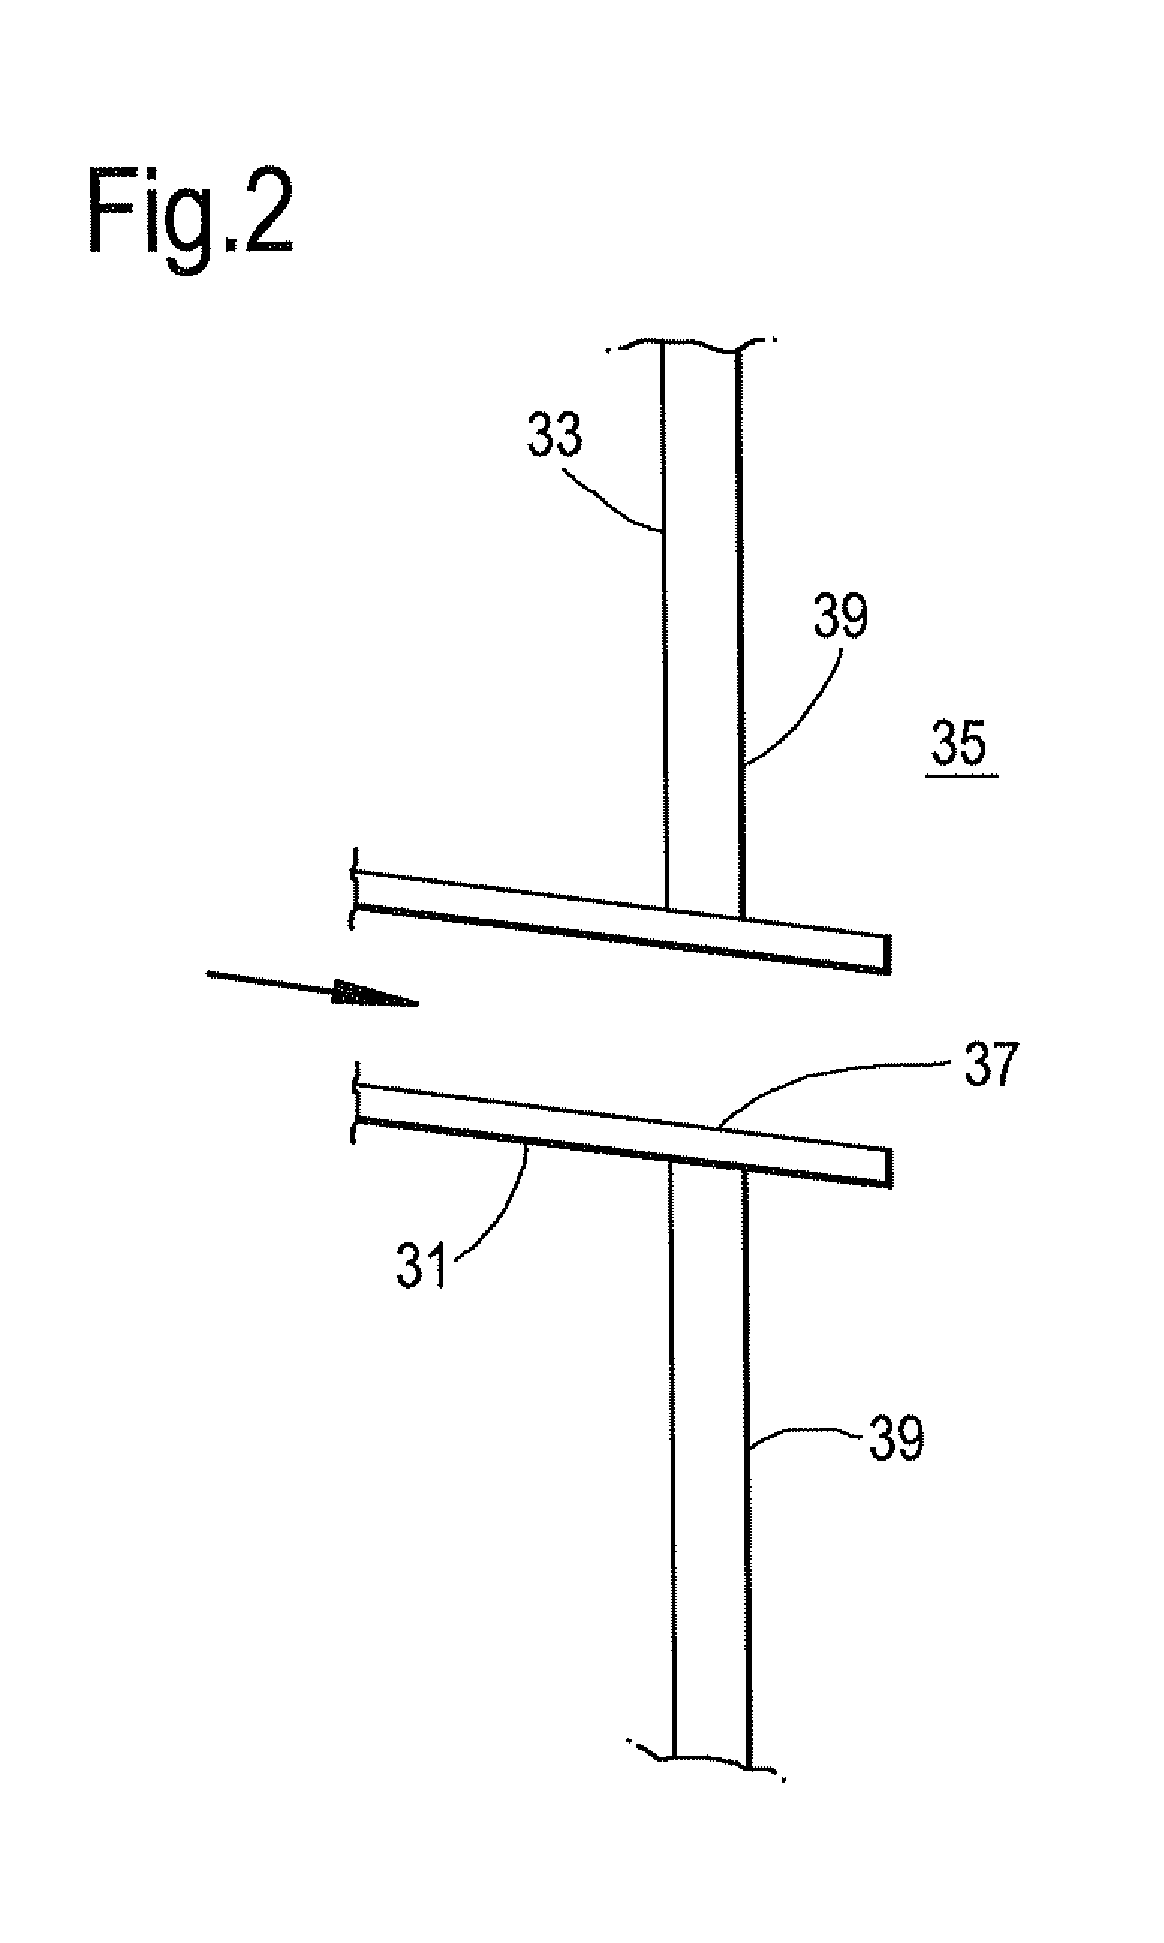 Process and reactor system for the preparation of an olefinic product